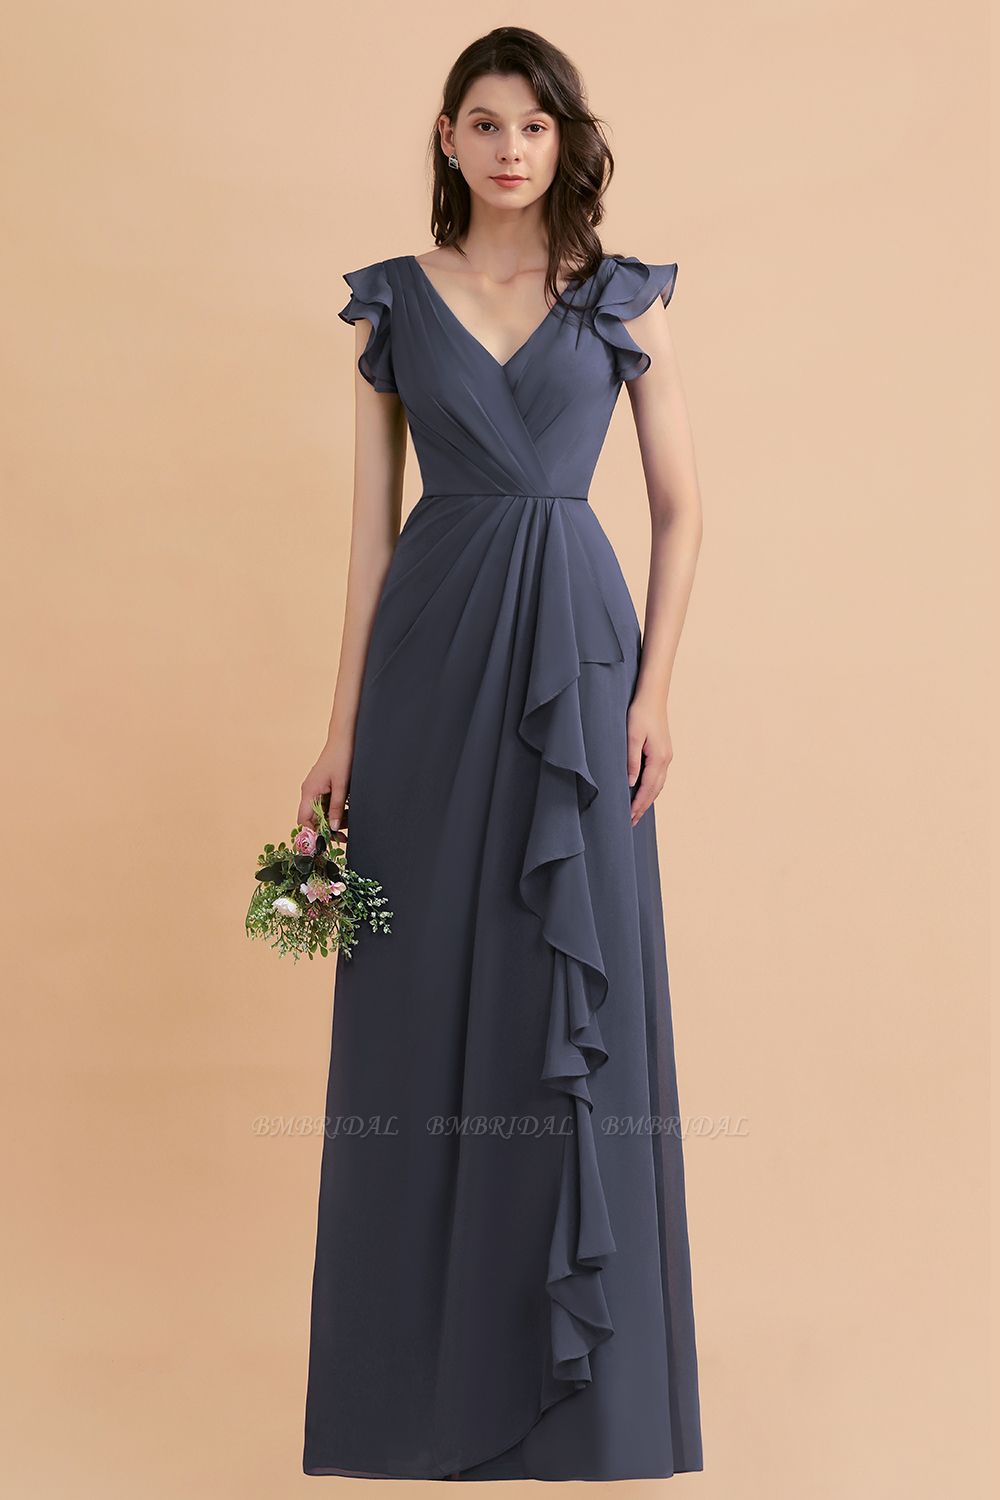 BMbridal Affordable V-Neck Chiffon Ruffles Bridesmaid Dress with Pockets On Sale